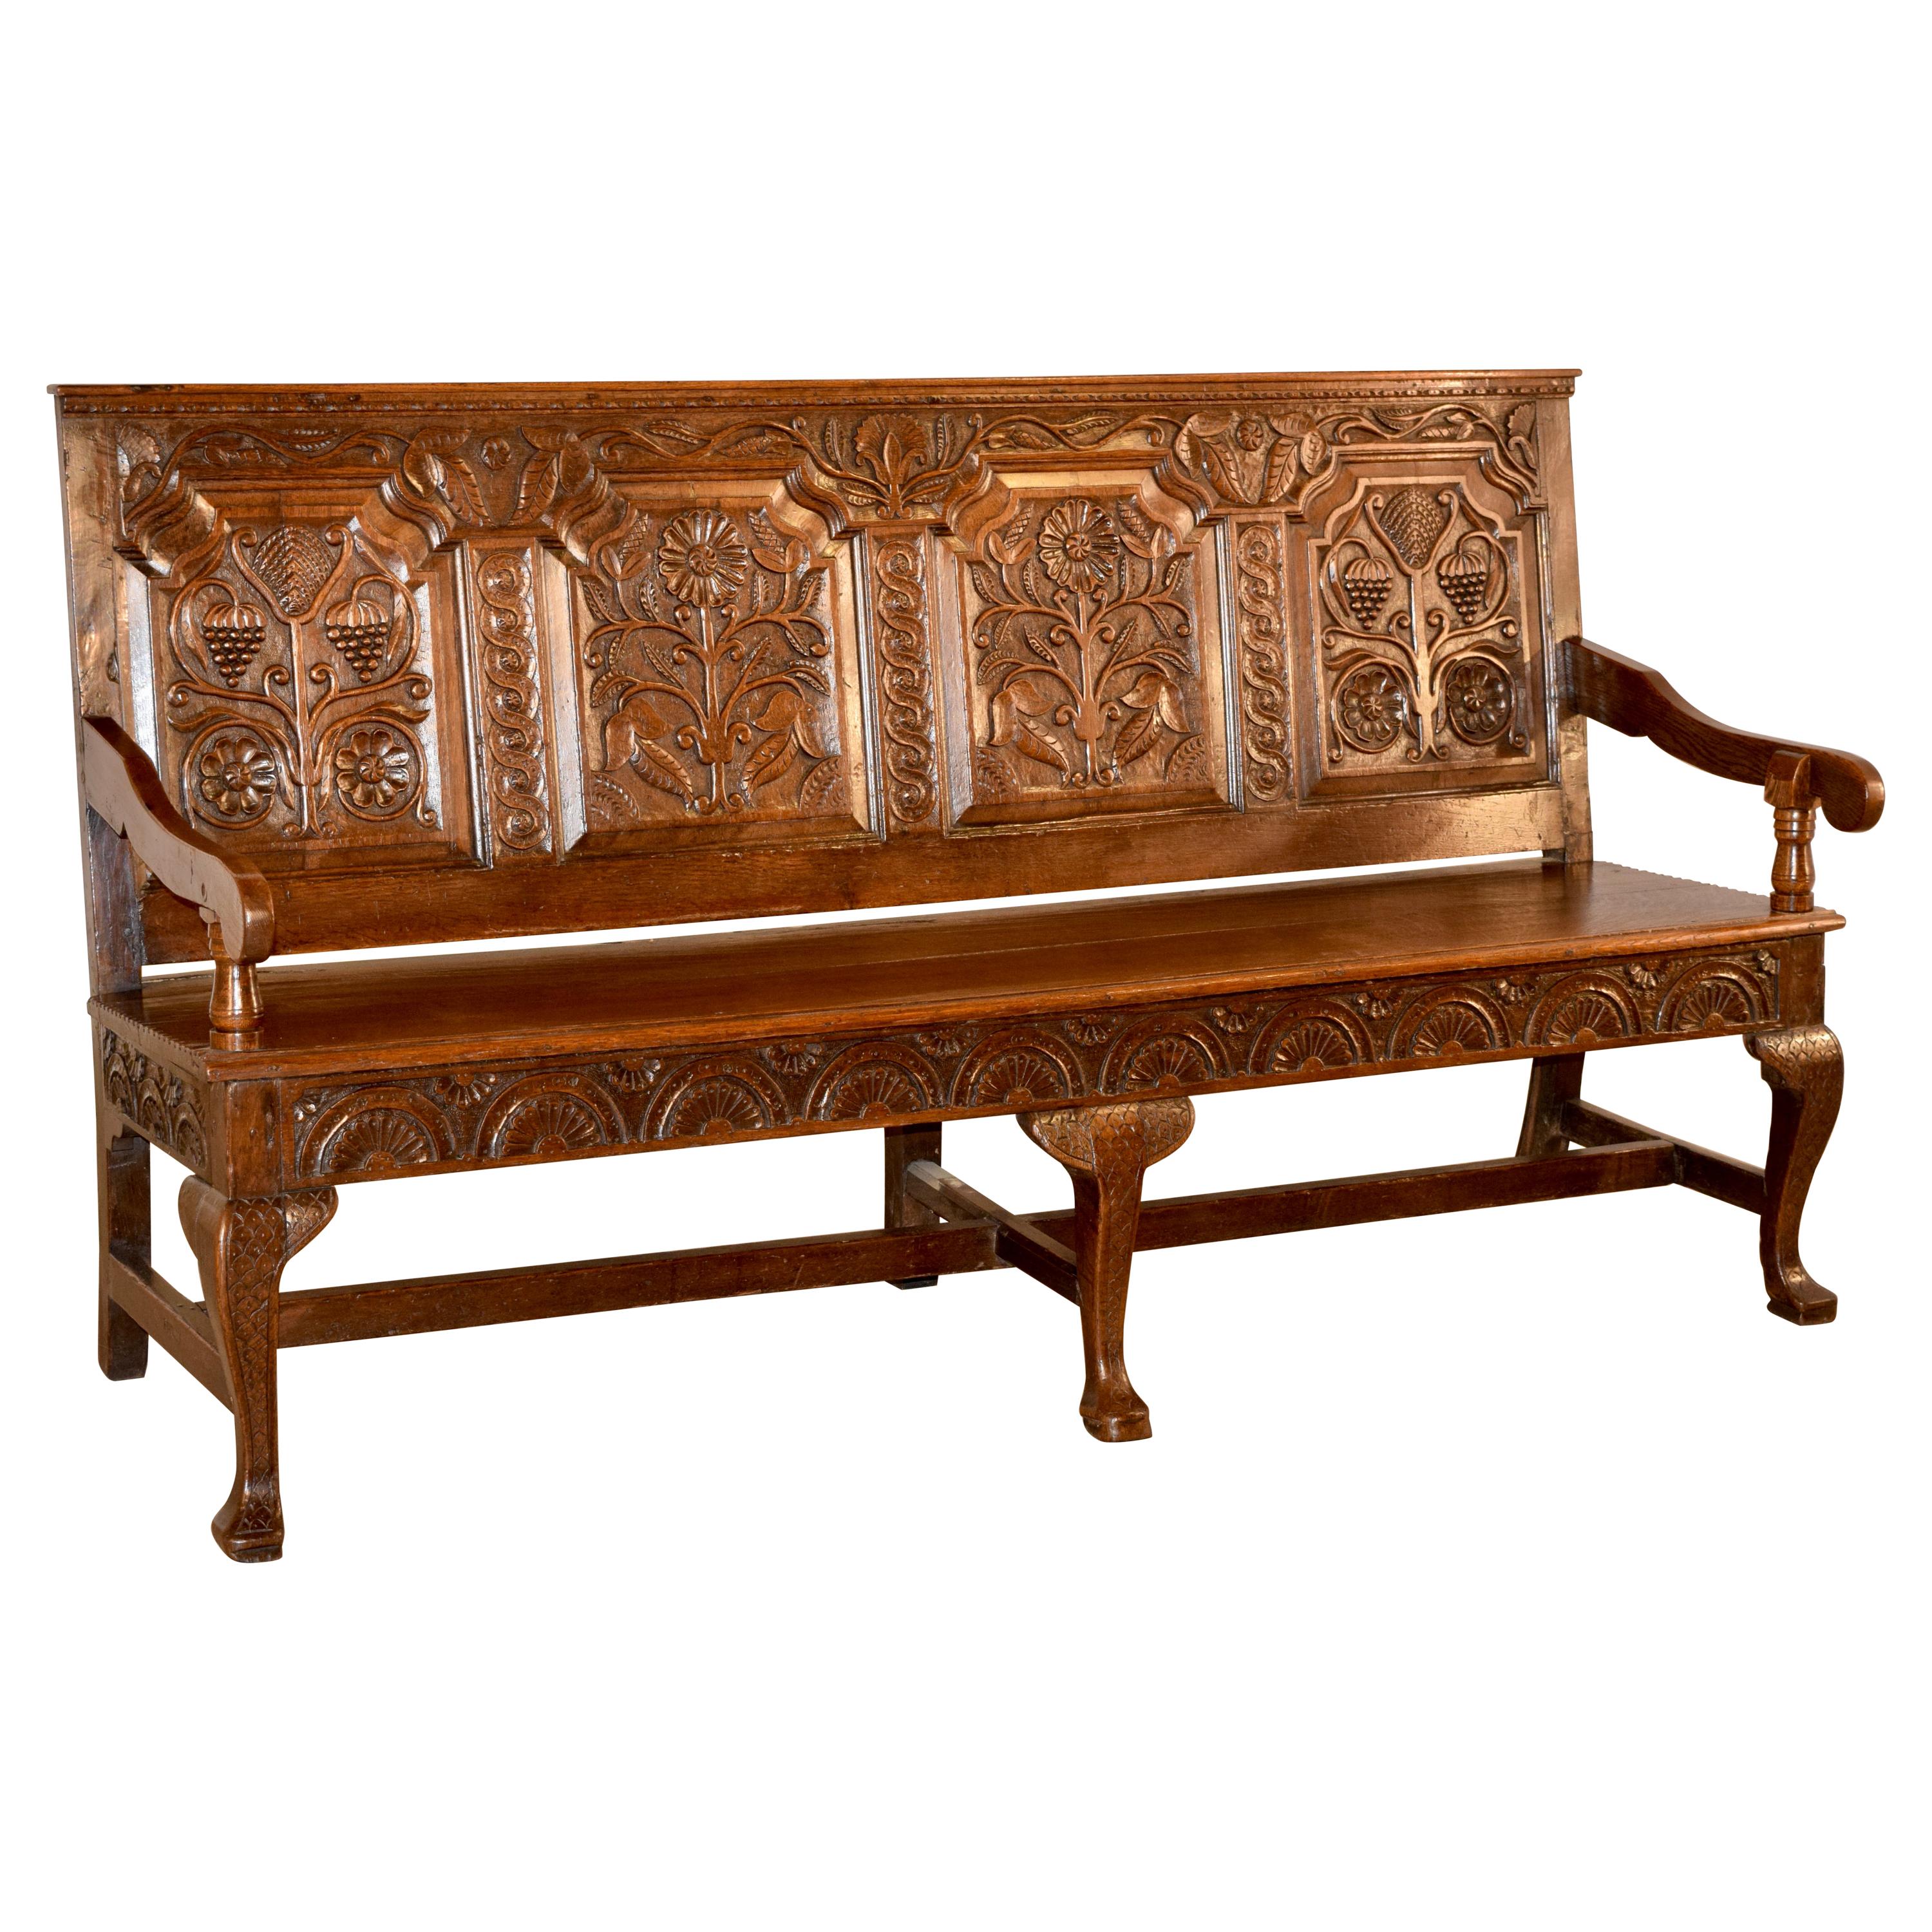 Early 18th Century Paneled Bench